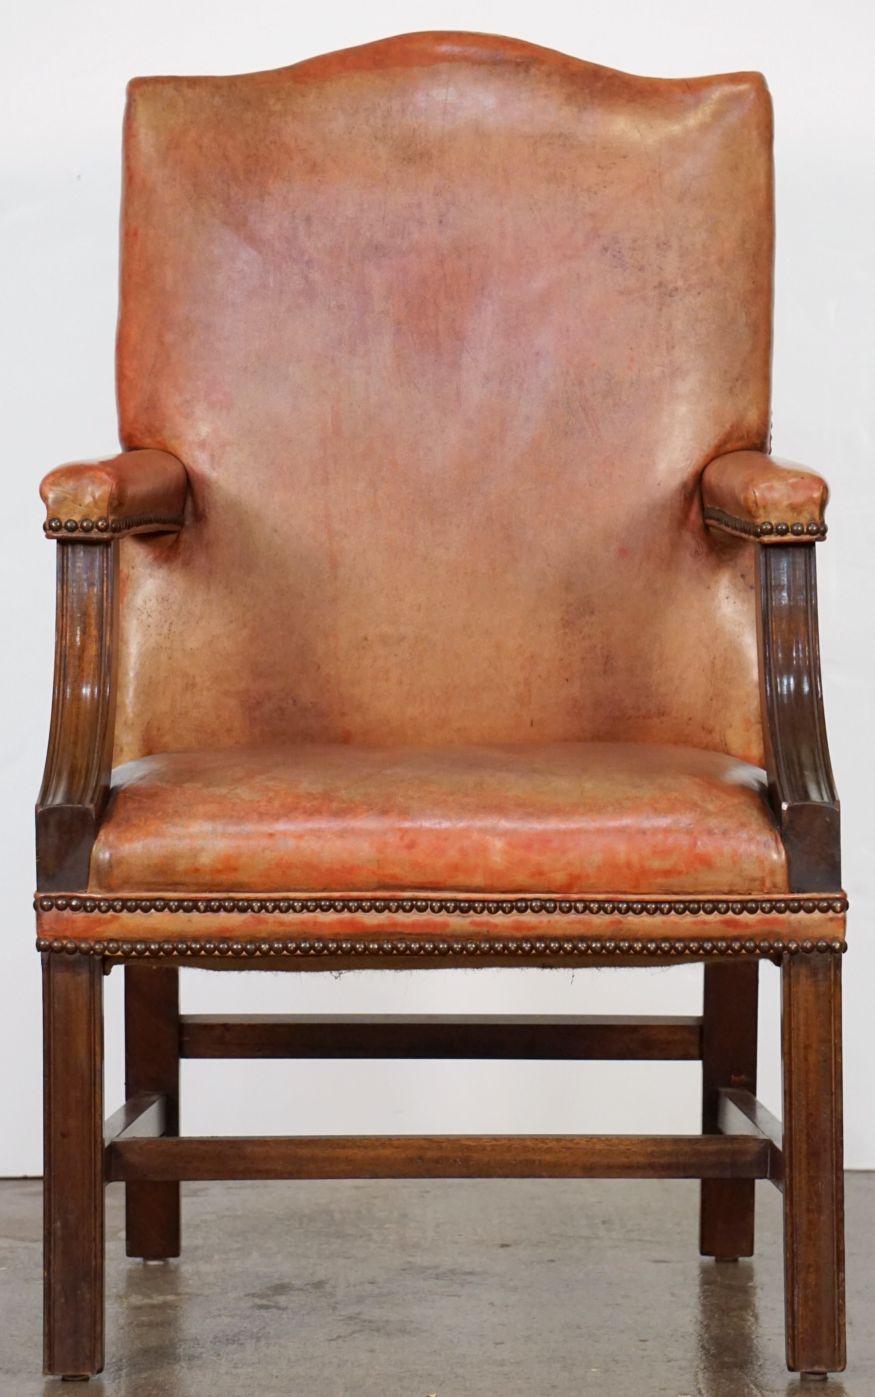 A fine English leather and mahogany Gainsborough armchair - featuring a high back, open sides and shaped arms, with wide comfortable seat, on a mahogany stretcher.
The leather upholstery with brass nail-head trim around the borders.

